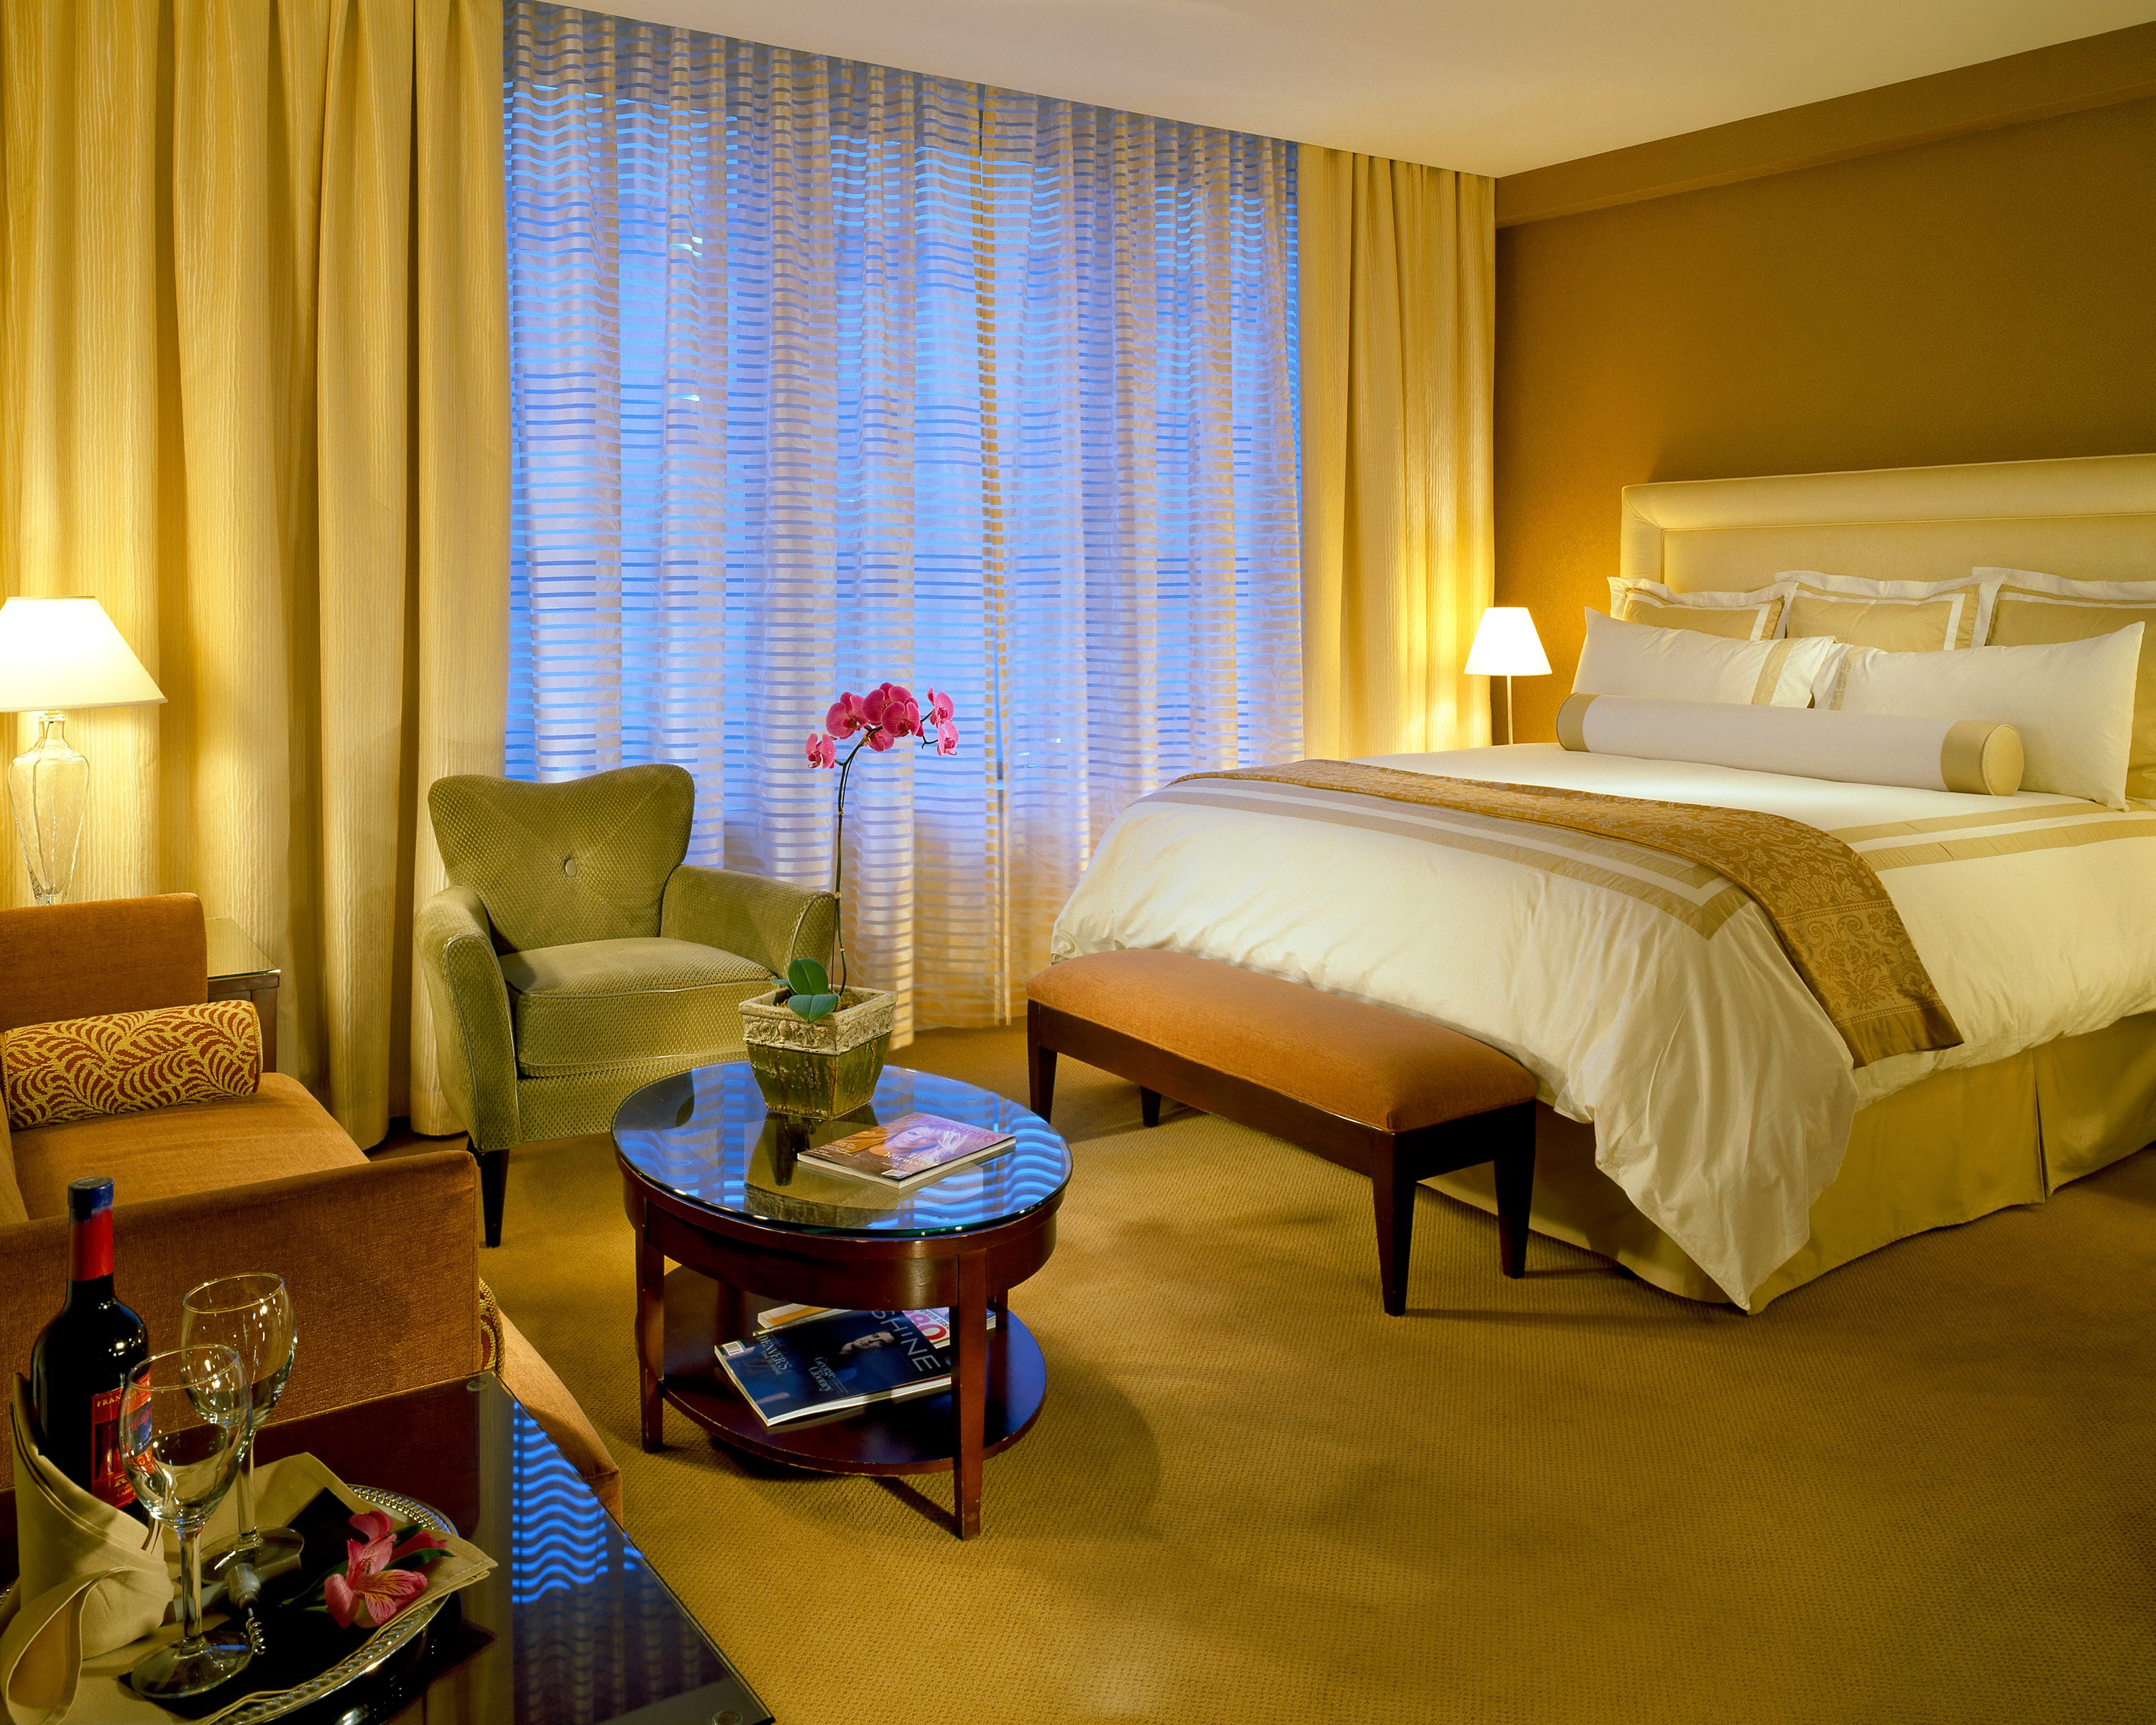 Hotel Teatro is an ideally-located Downtown Denver Hotel.